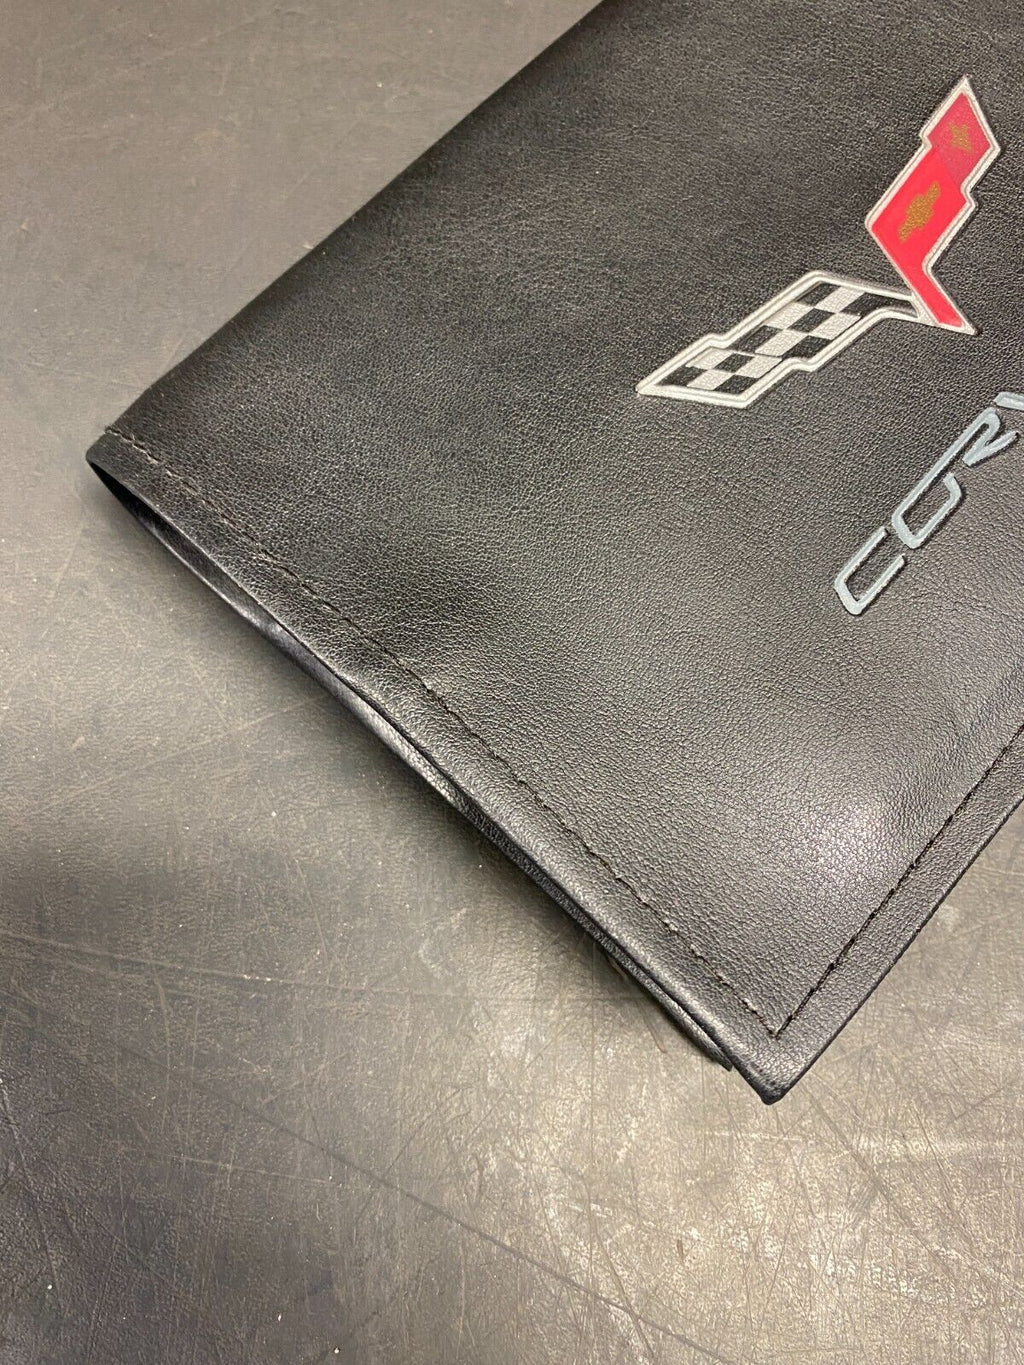 2005 CORVETTE C6 OEM OWNER MANUAL WITH LEATHER CASE USED